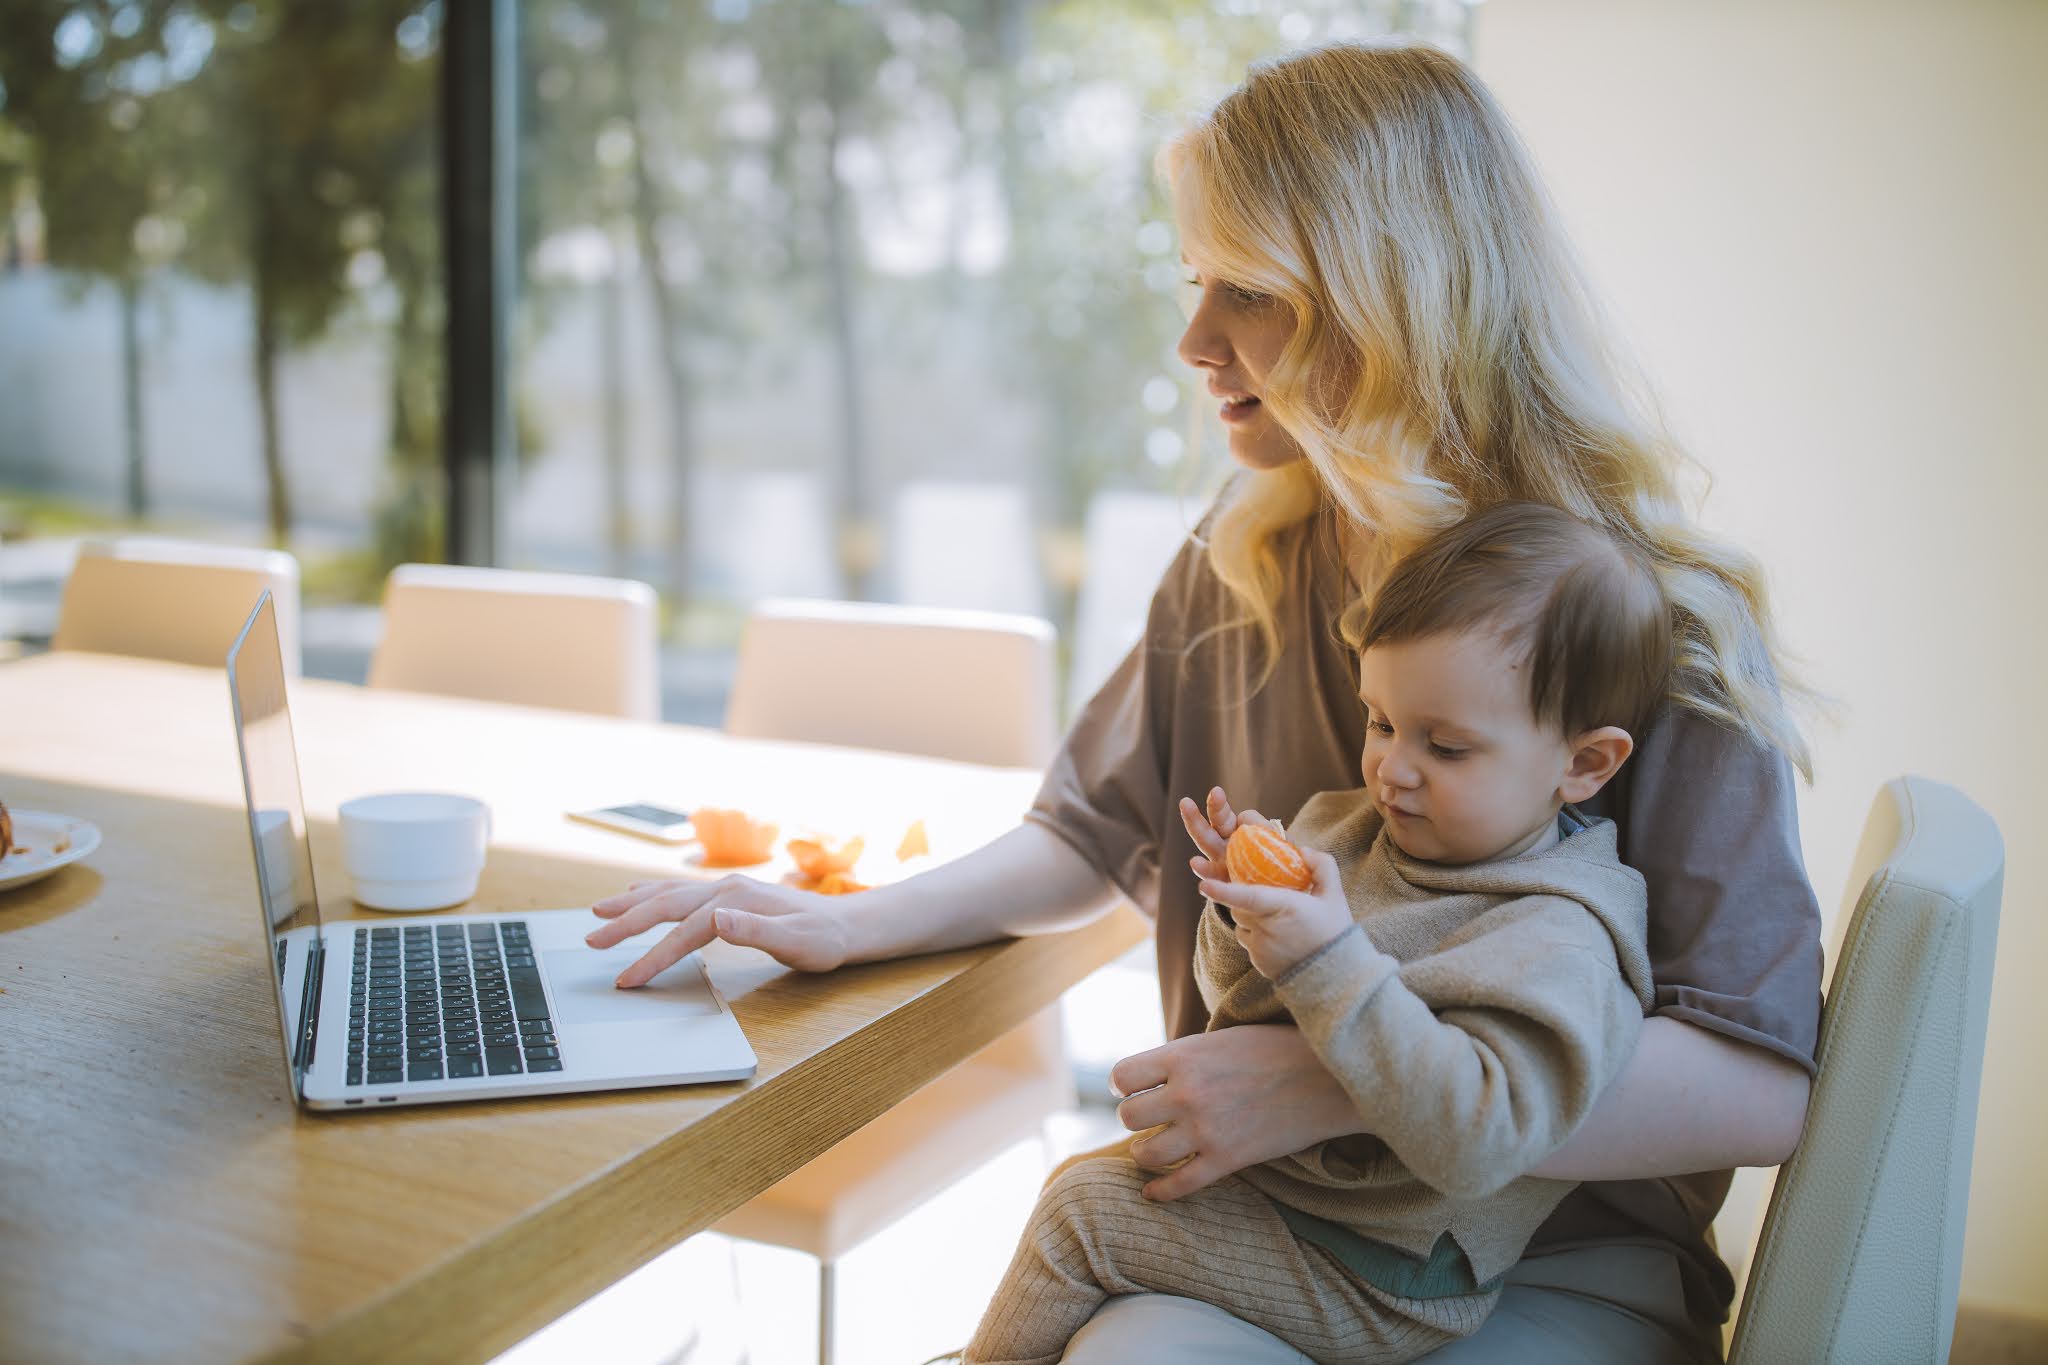 SELF-CARE TIPS FOR WORKING MOTHERS